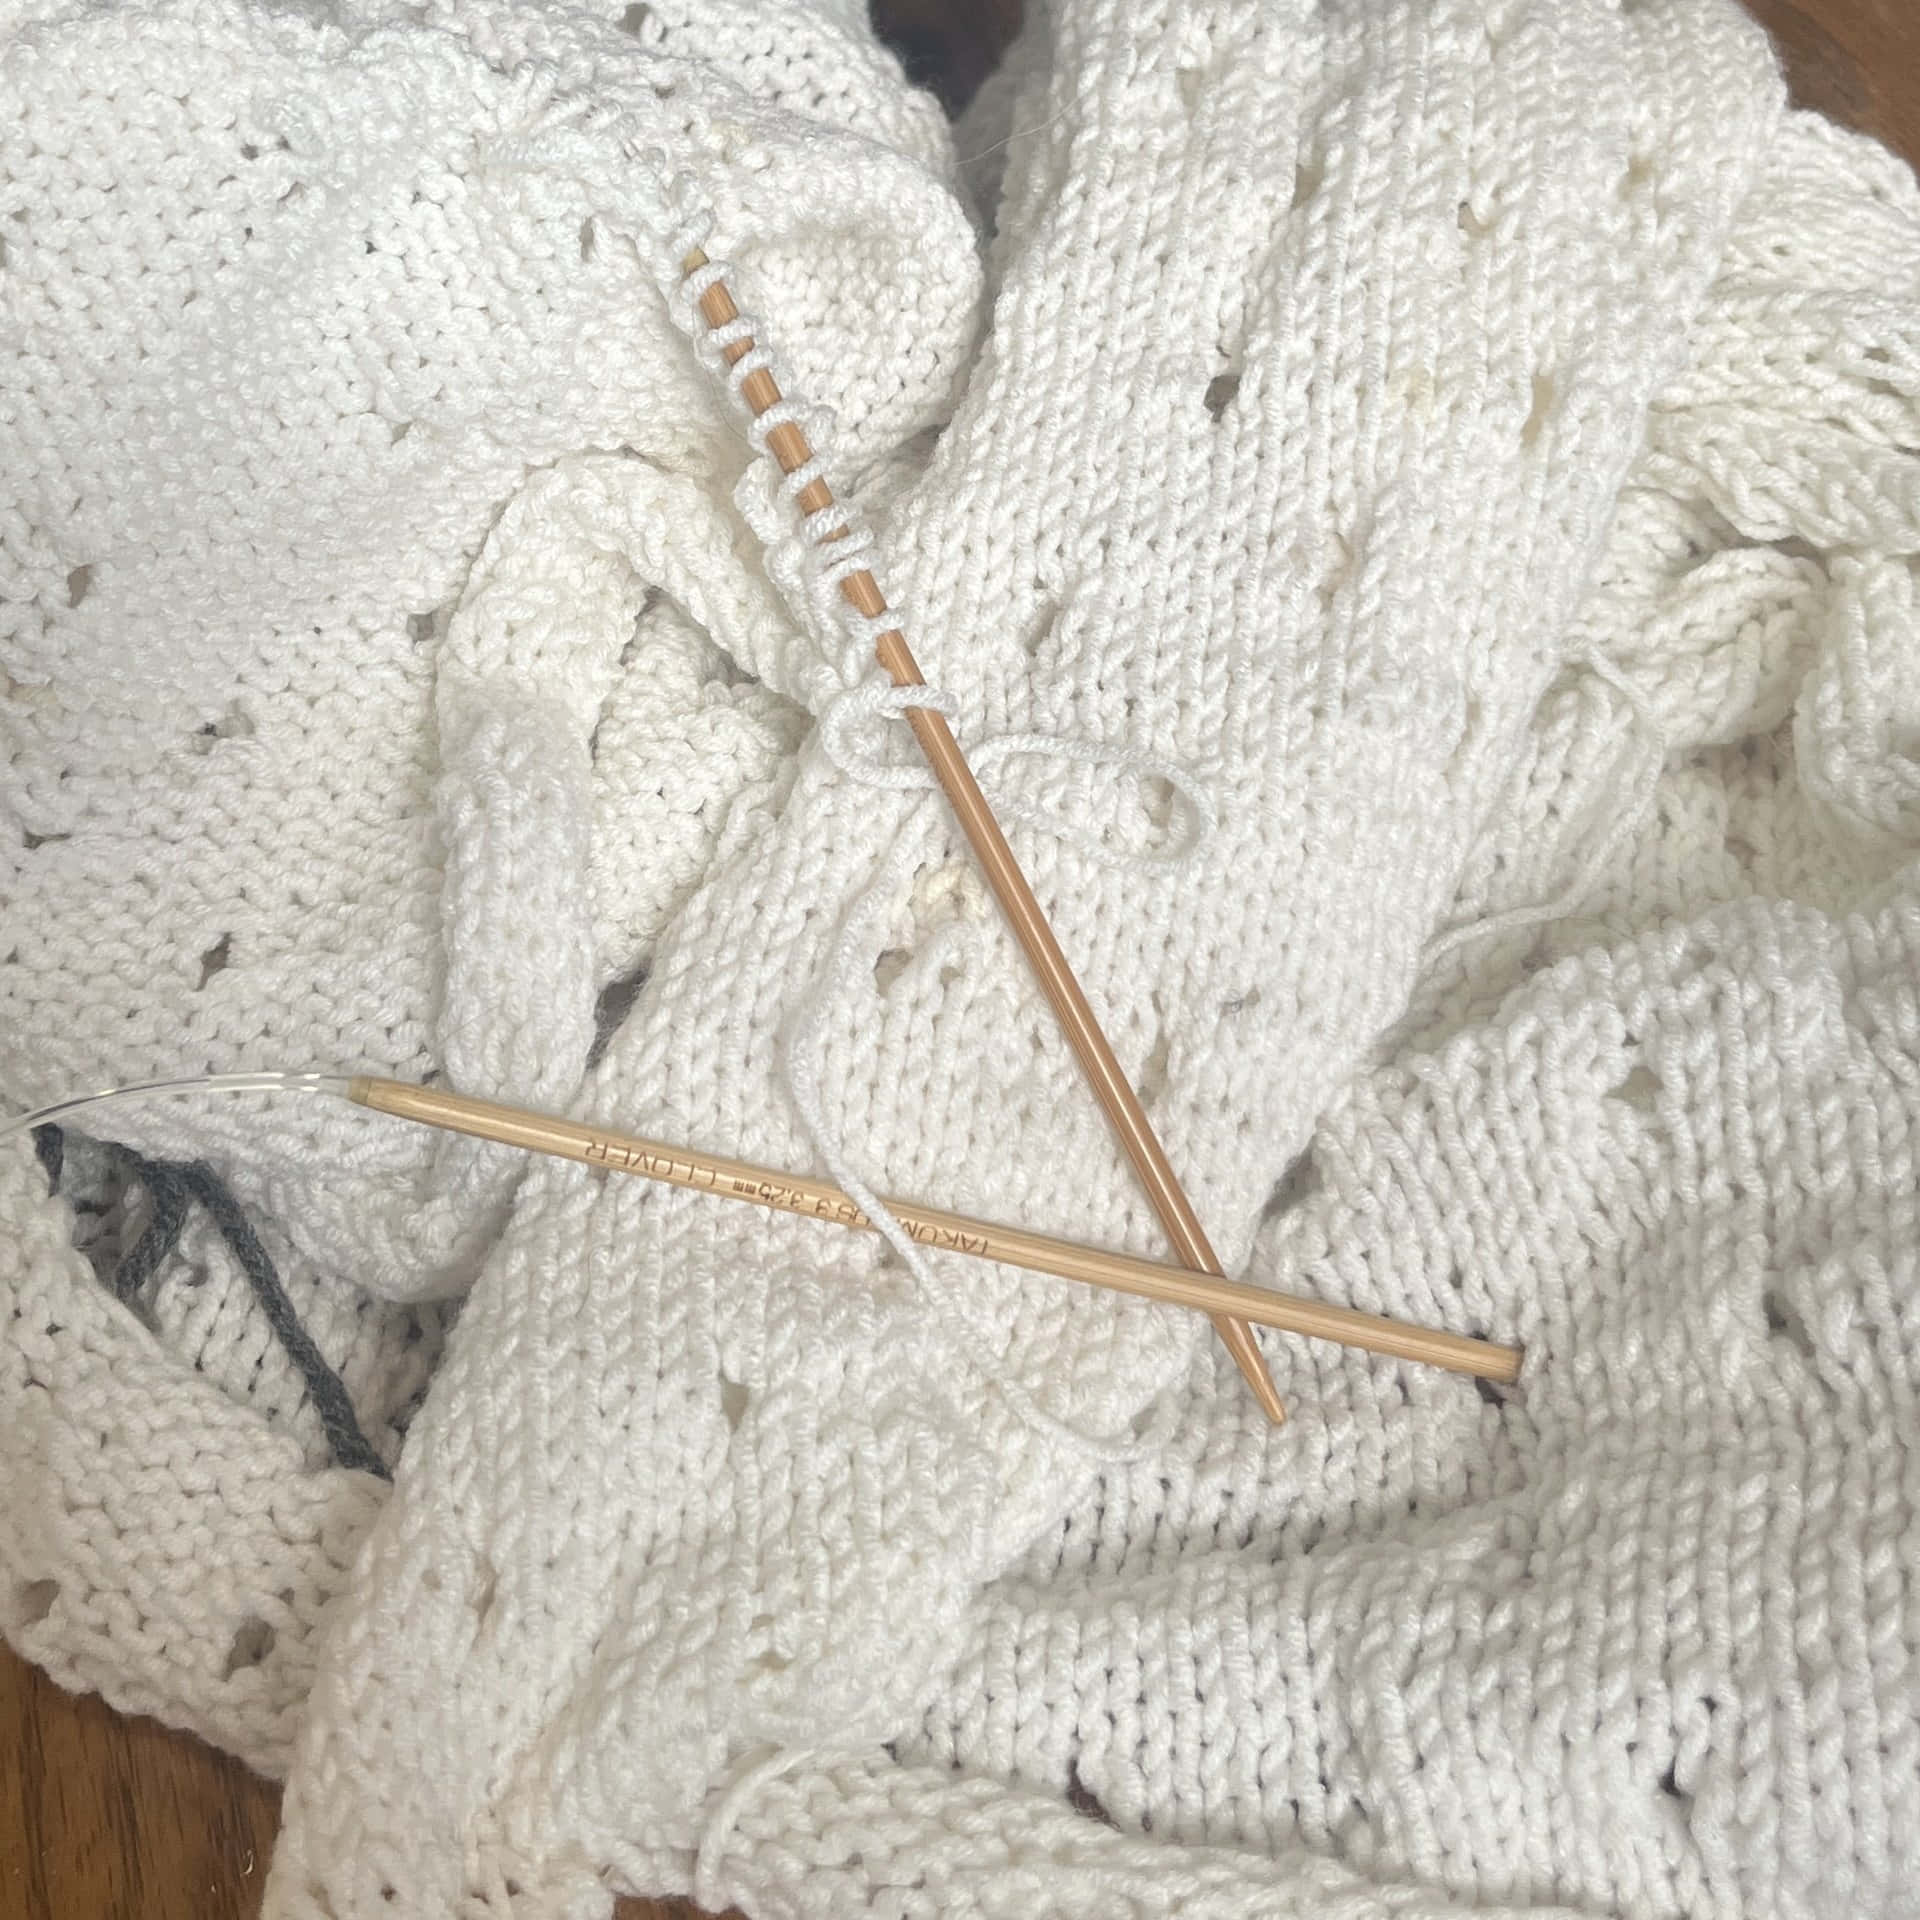 A White Knitted Sweater With Knitting Needles On Top